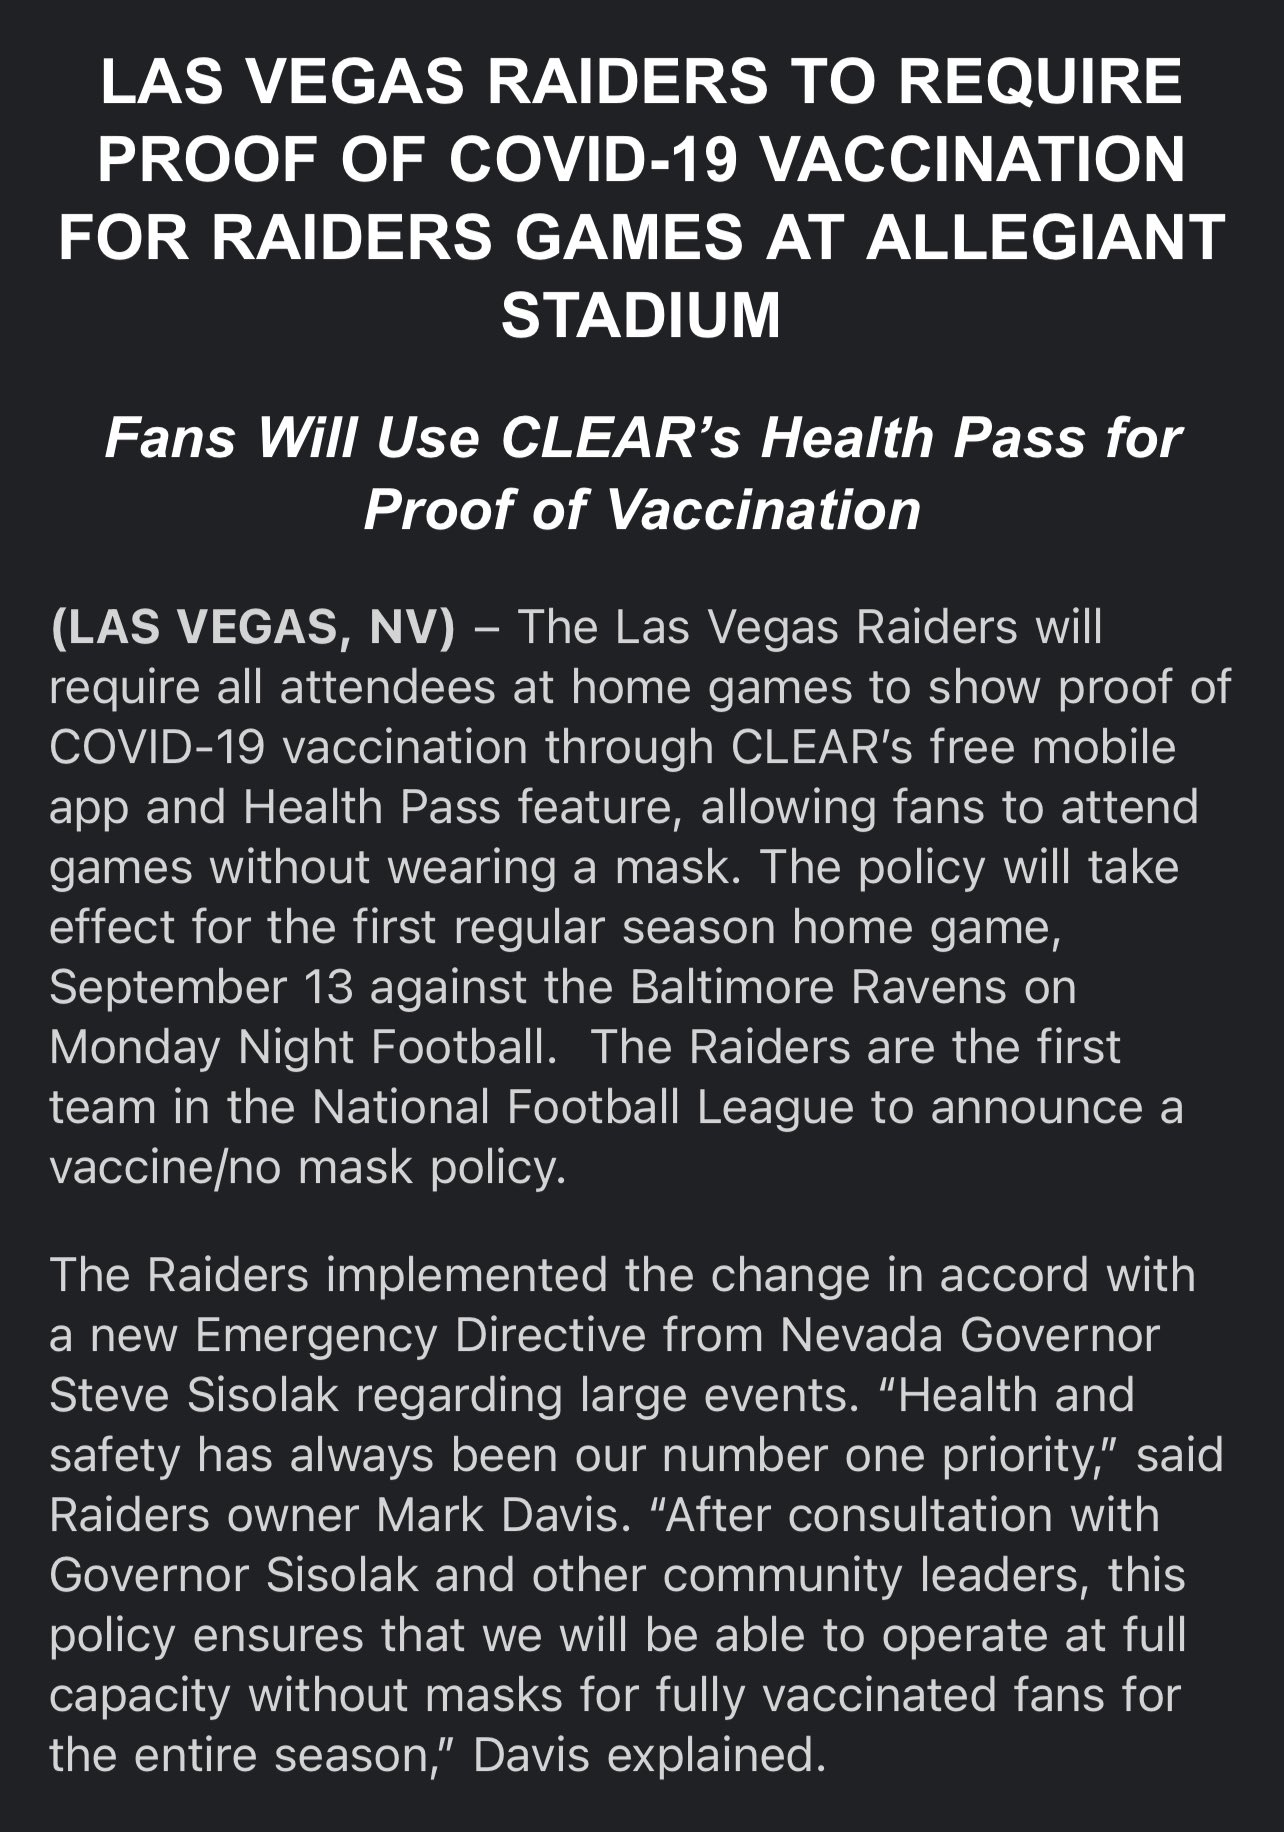 Las Vegas Raiders will require all fans to get vaccinated if they